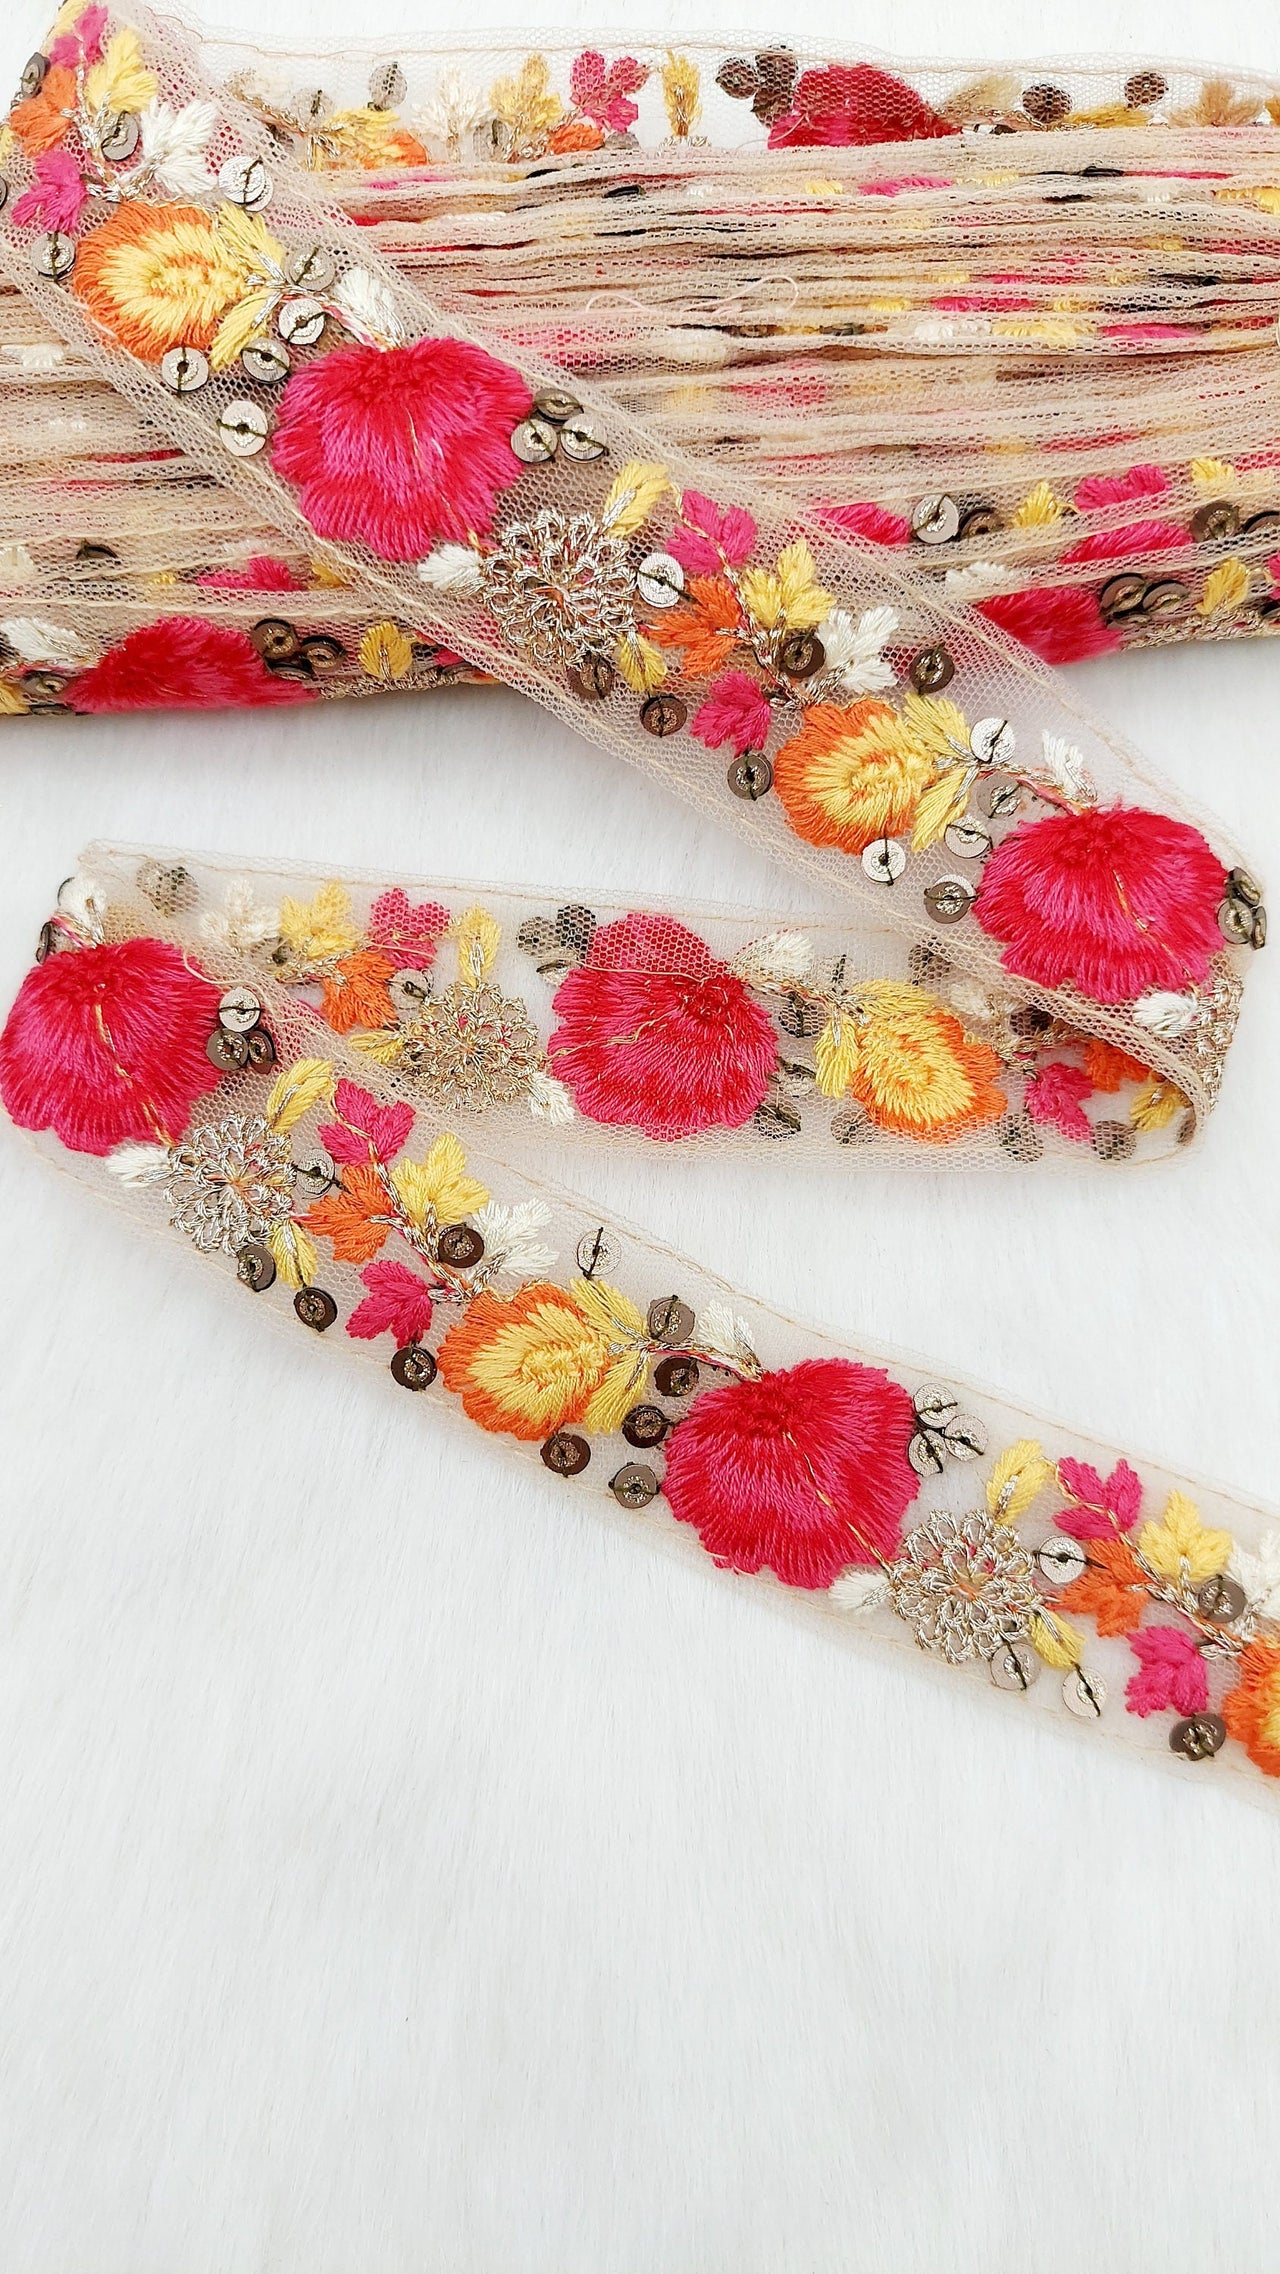 9 Yards Pink and Yellow Soft Net Lace Trim Floral Embroidery and Gold Sequins, Floral Sari Border, Decorative Trim